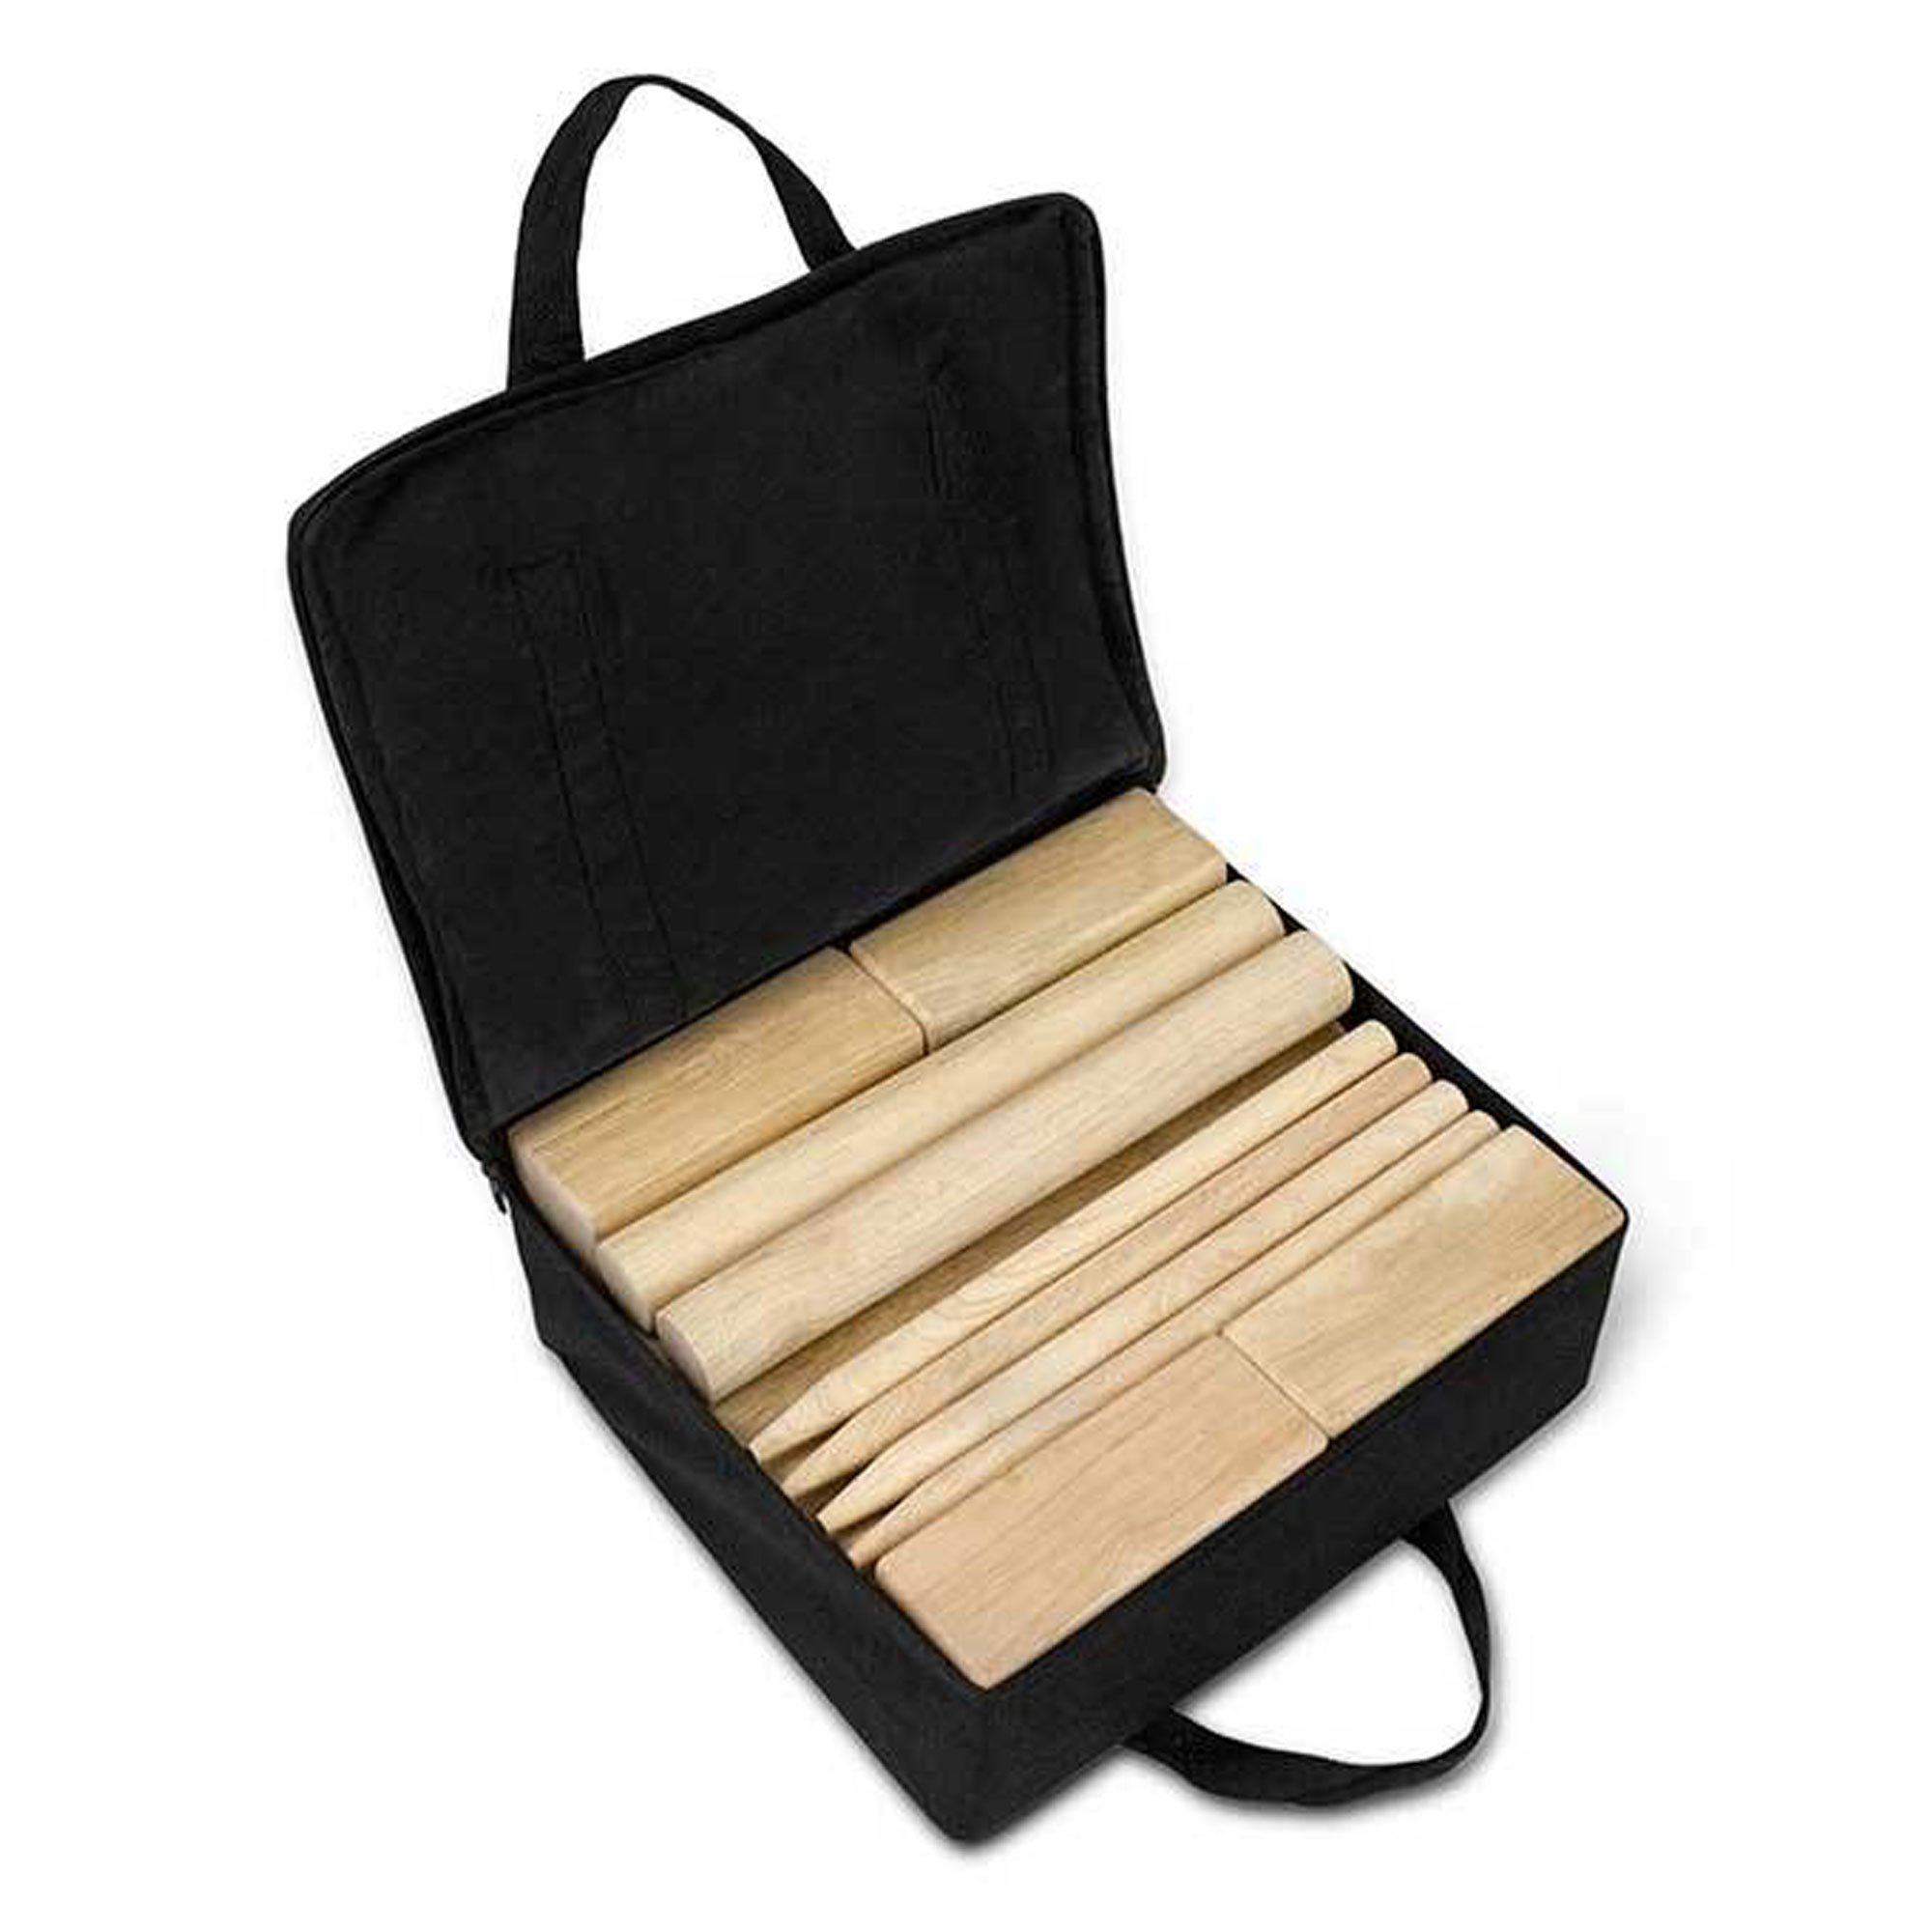 YardGames Kubb Premium Wooden Outdoor Backyard Game Set with Carrying Bag - image 4 of 11